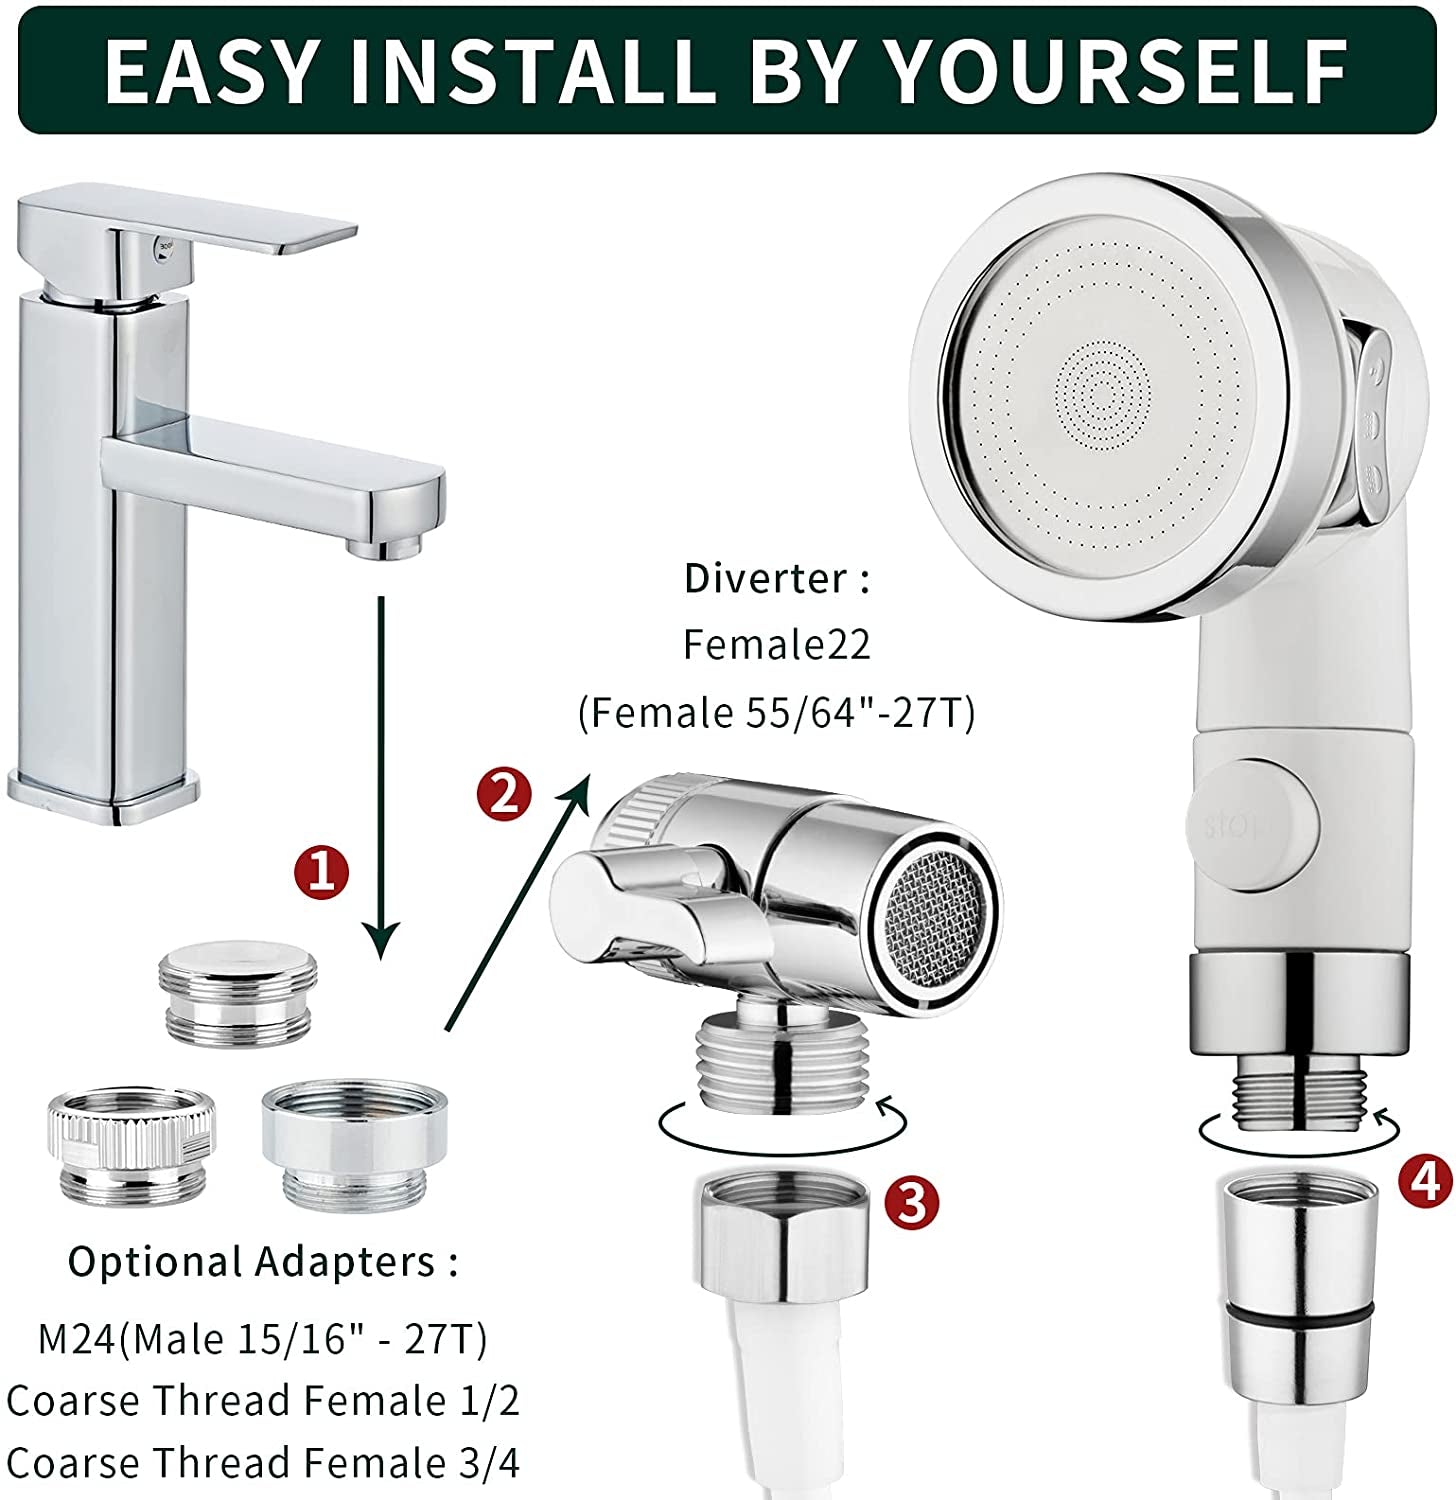 Versatile Sink Faucet Sprayer Attachment: Transform Your Tub Faucet into a Convenient Shower Head – Ideal for Dog Bathing, Laundry, Bathroom, and Kitchen Use